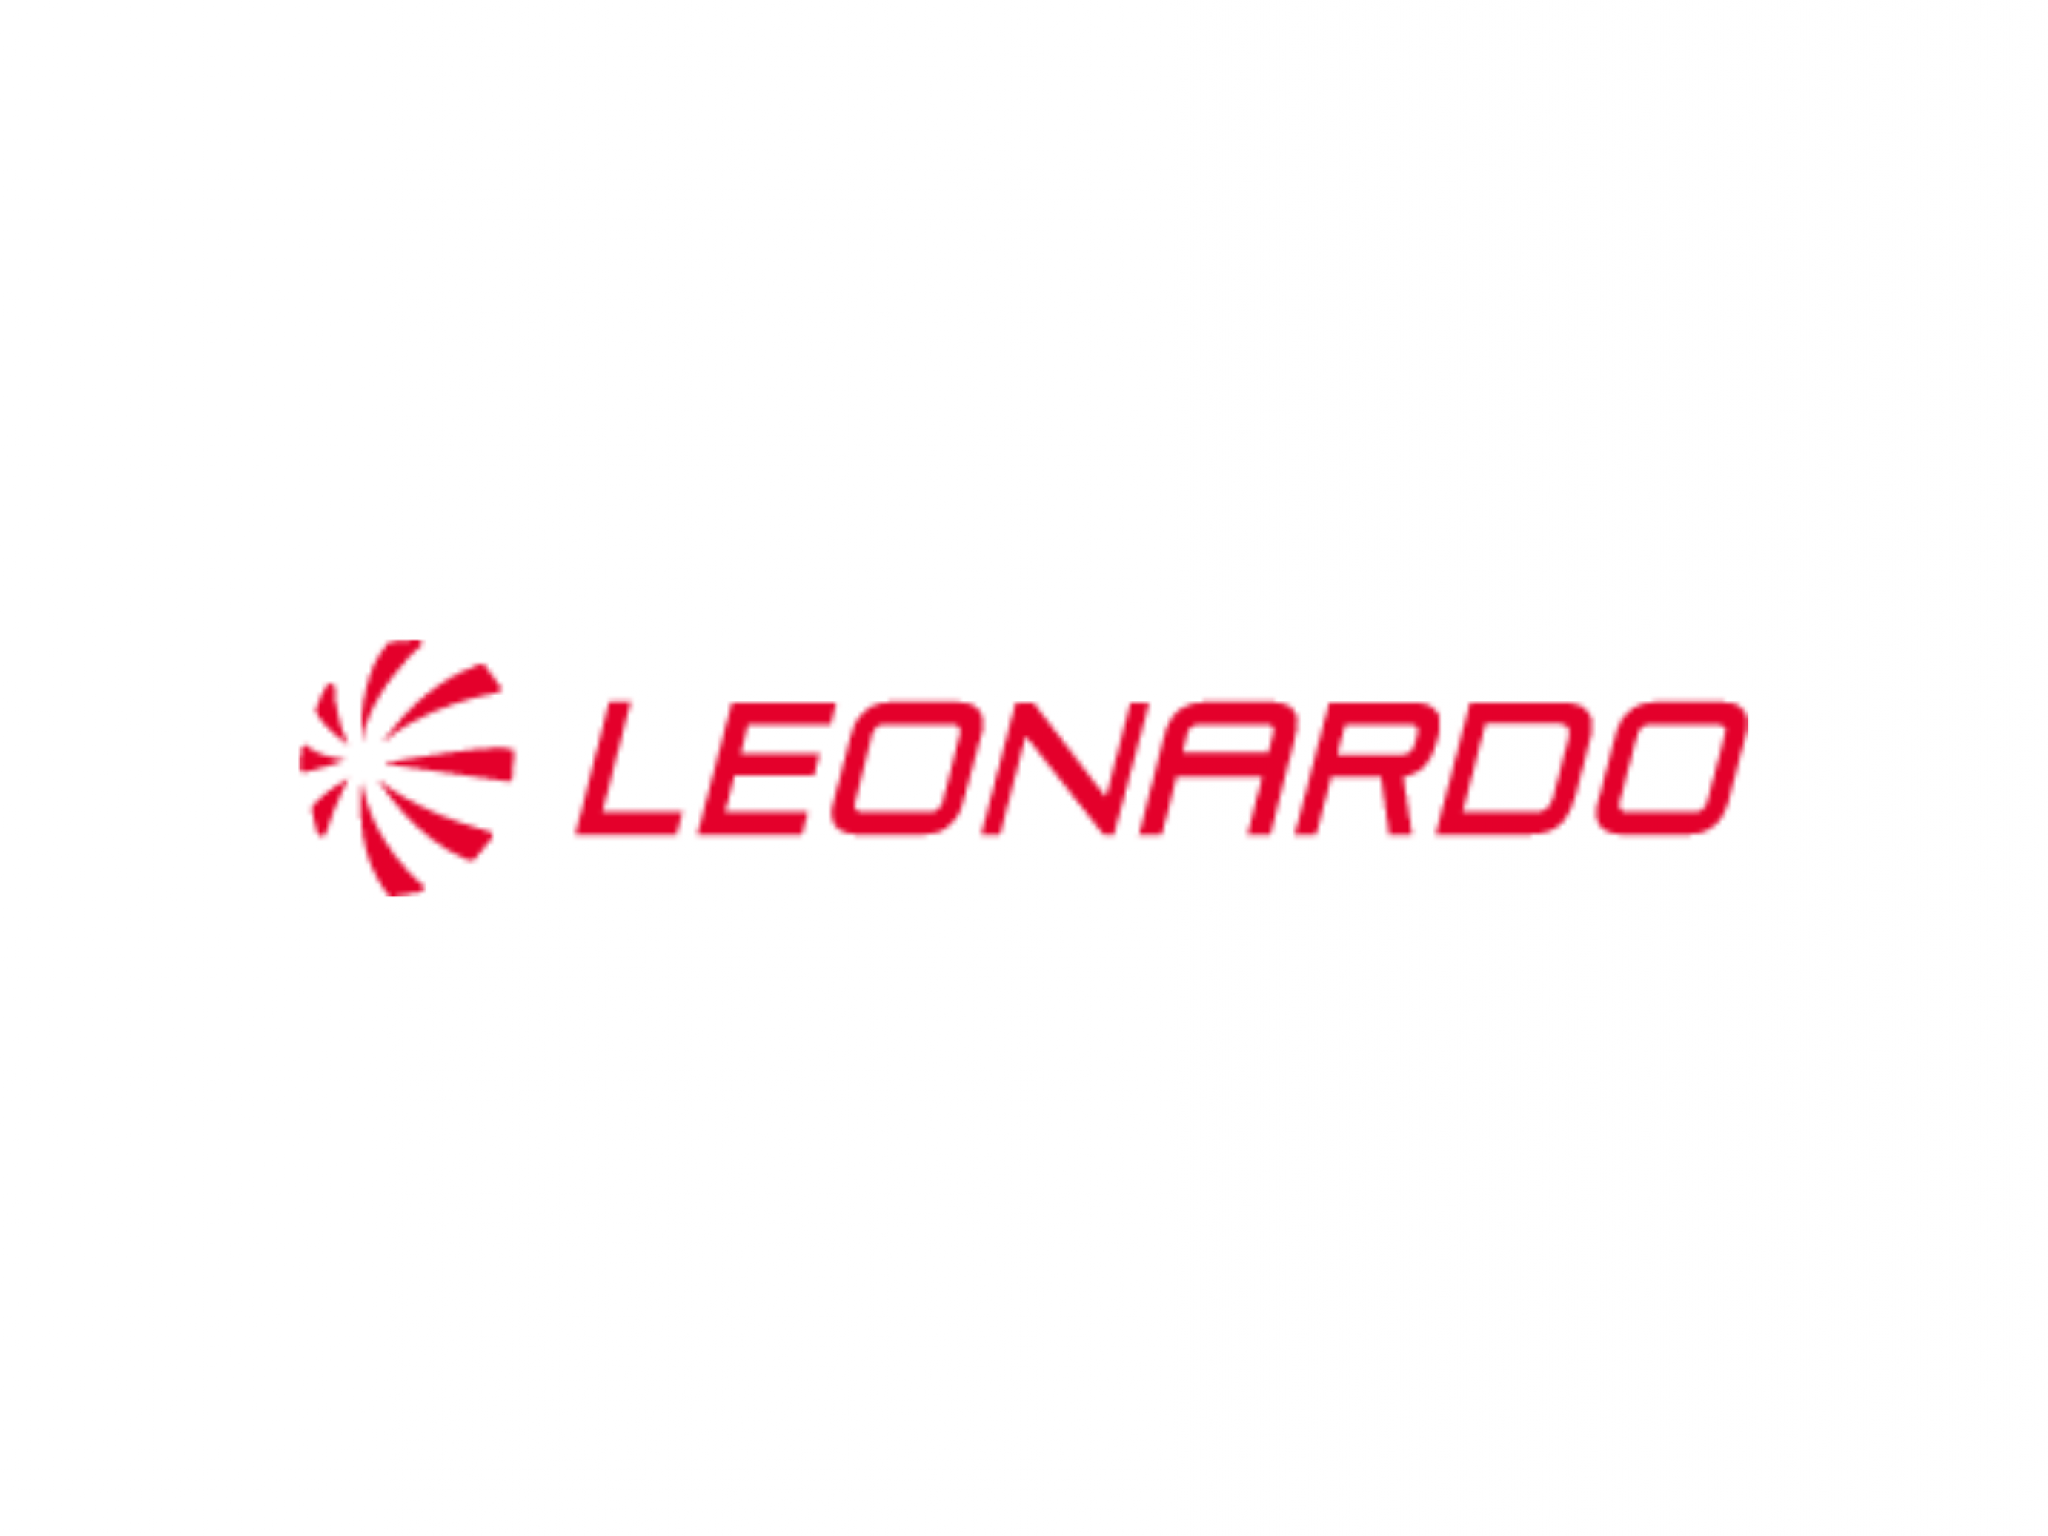  leonardo-siemens-join-forces-to-protect-industrial-infrastructures-from-cyber-threat 